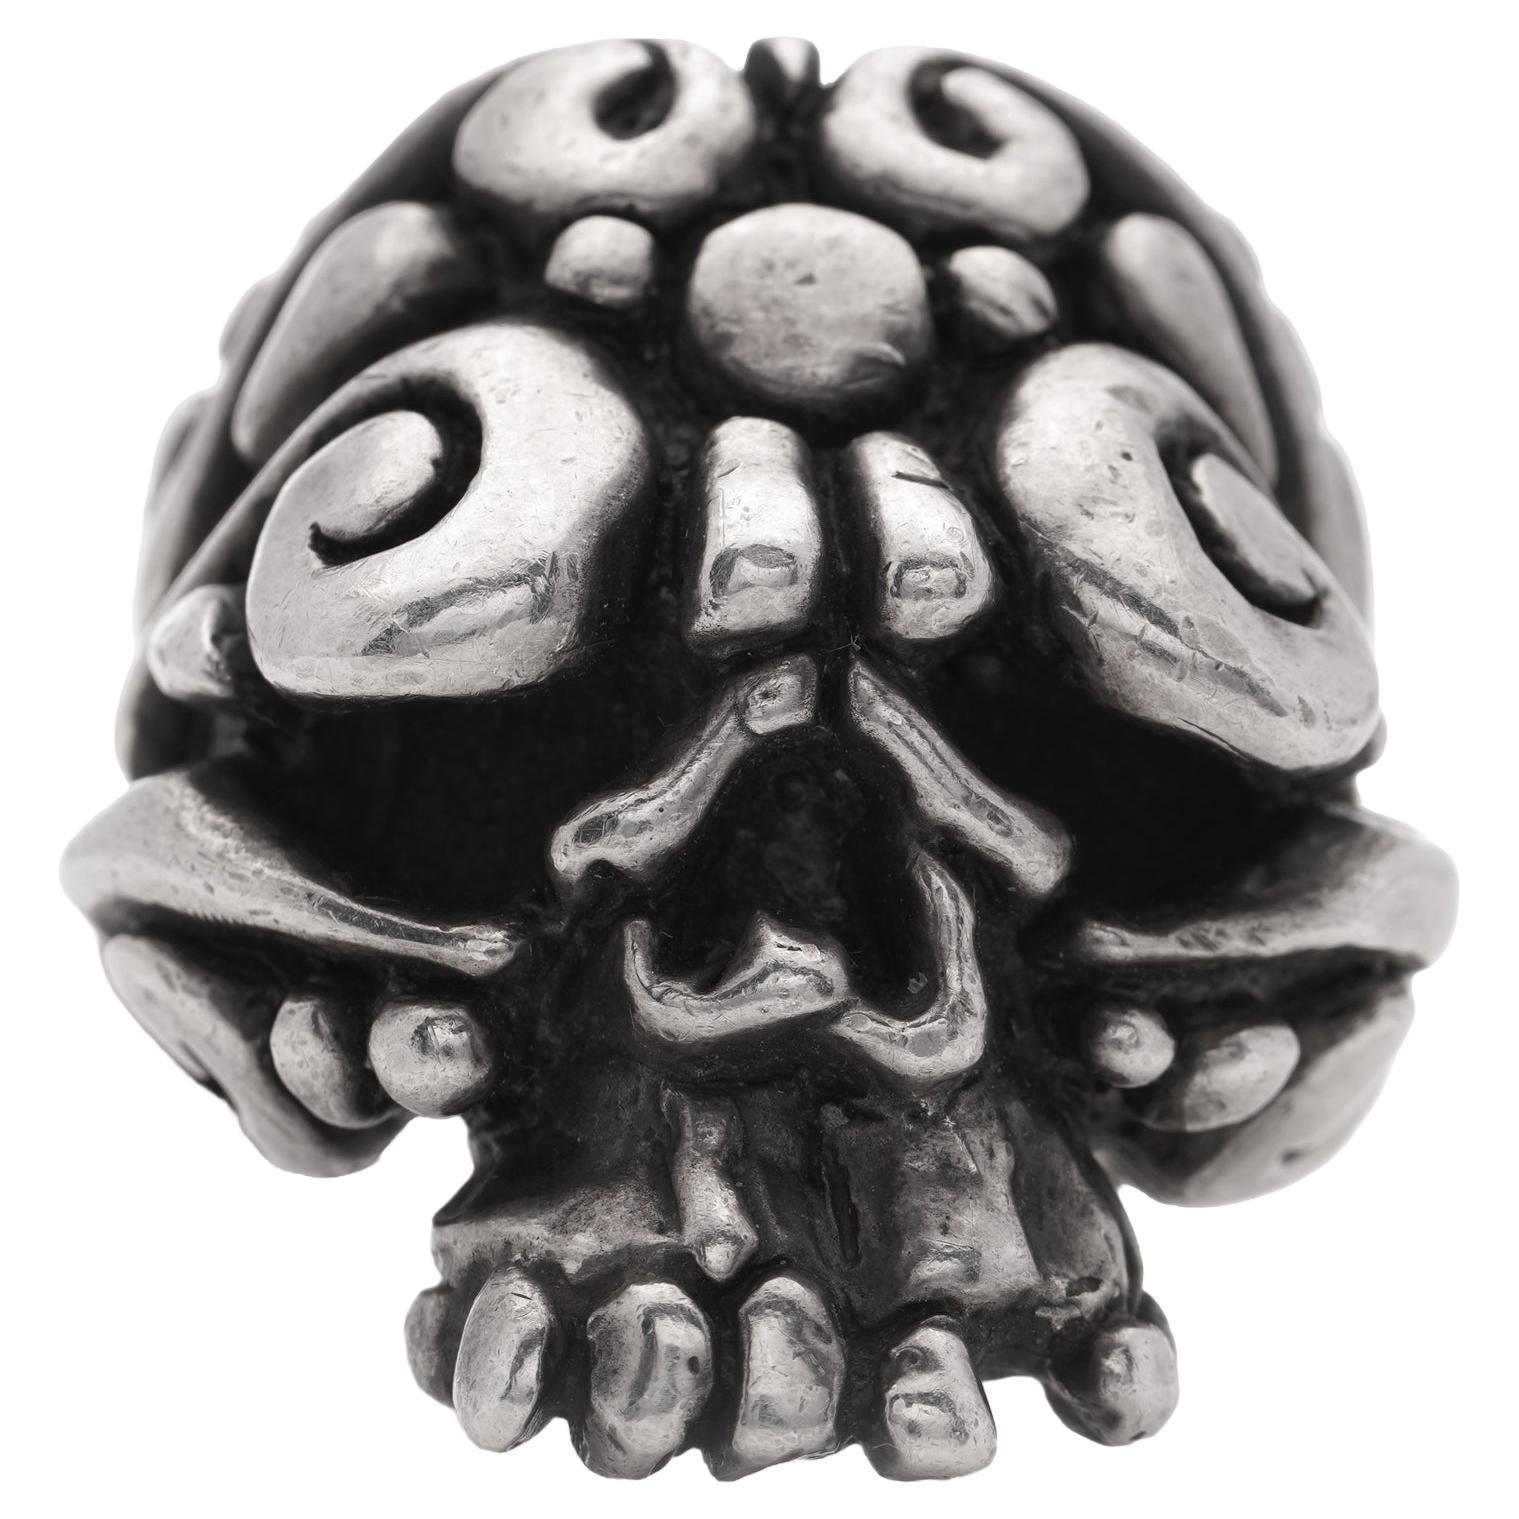 The Crazy Pig Designs sterling silver ' El Muertos ' collection skull ring.  For Sale